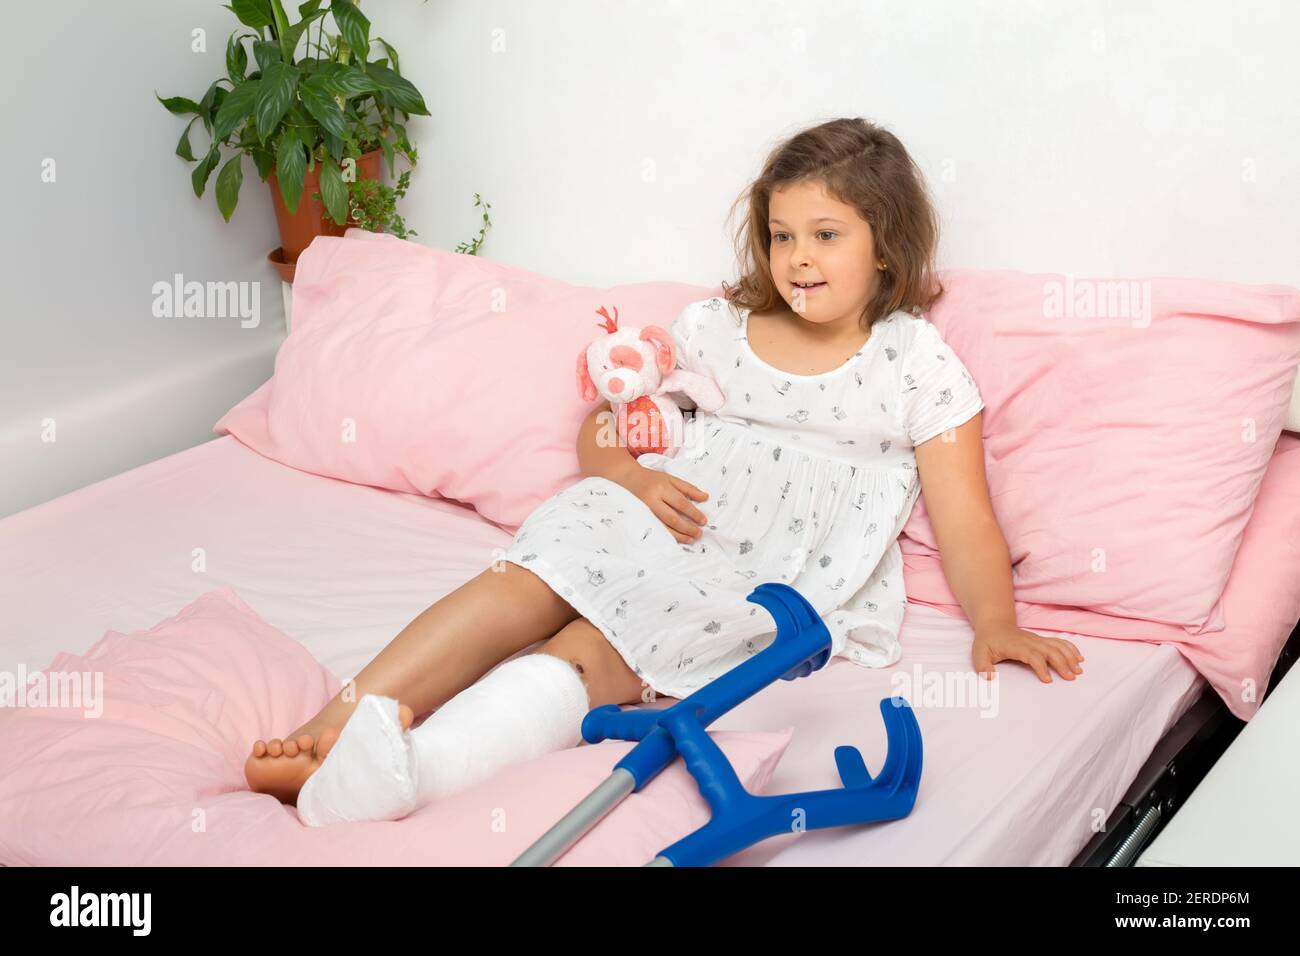 A relaxed teenage girl lies on the bed after receiving a plaster cast on her leg in an orthopedic emergency room. The child has a broken leg, broken Stock Photo